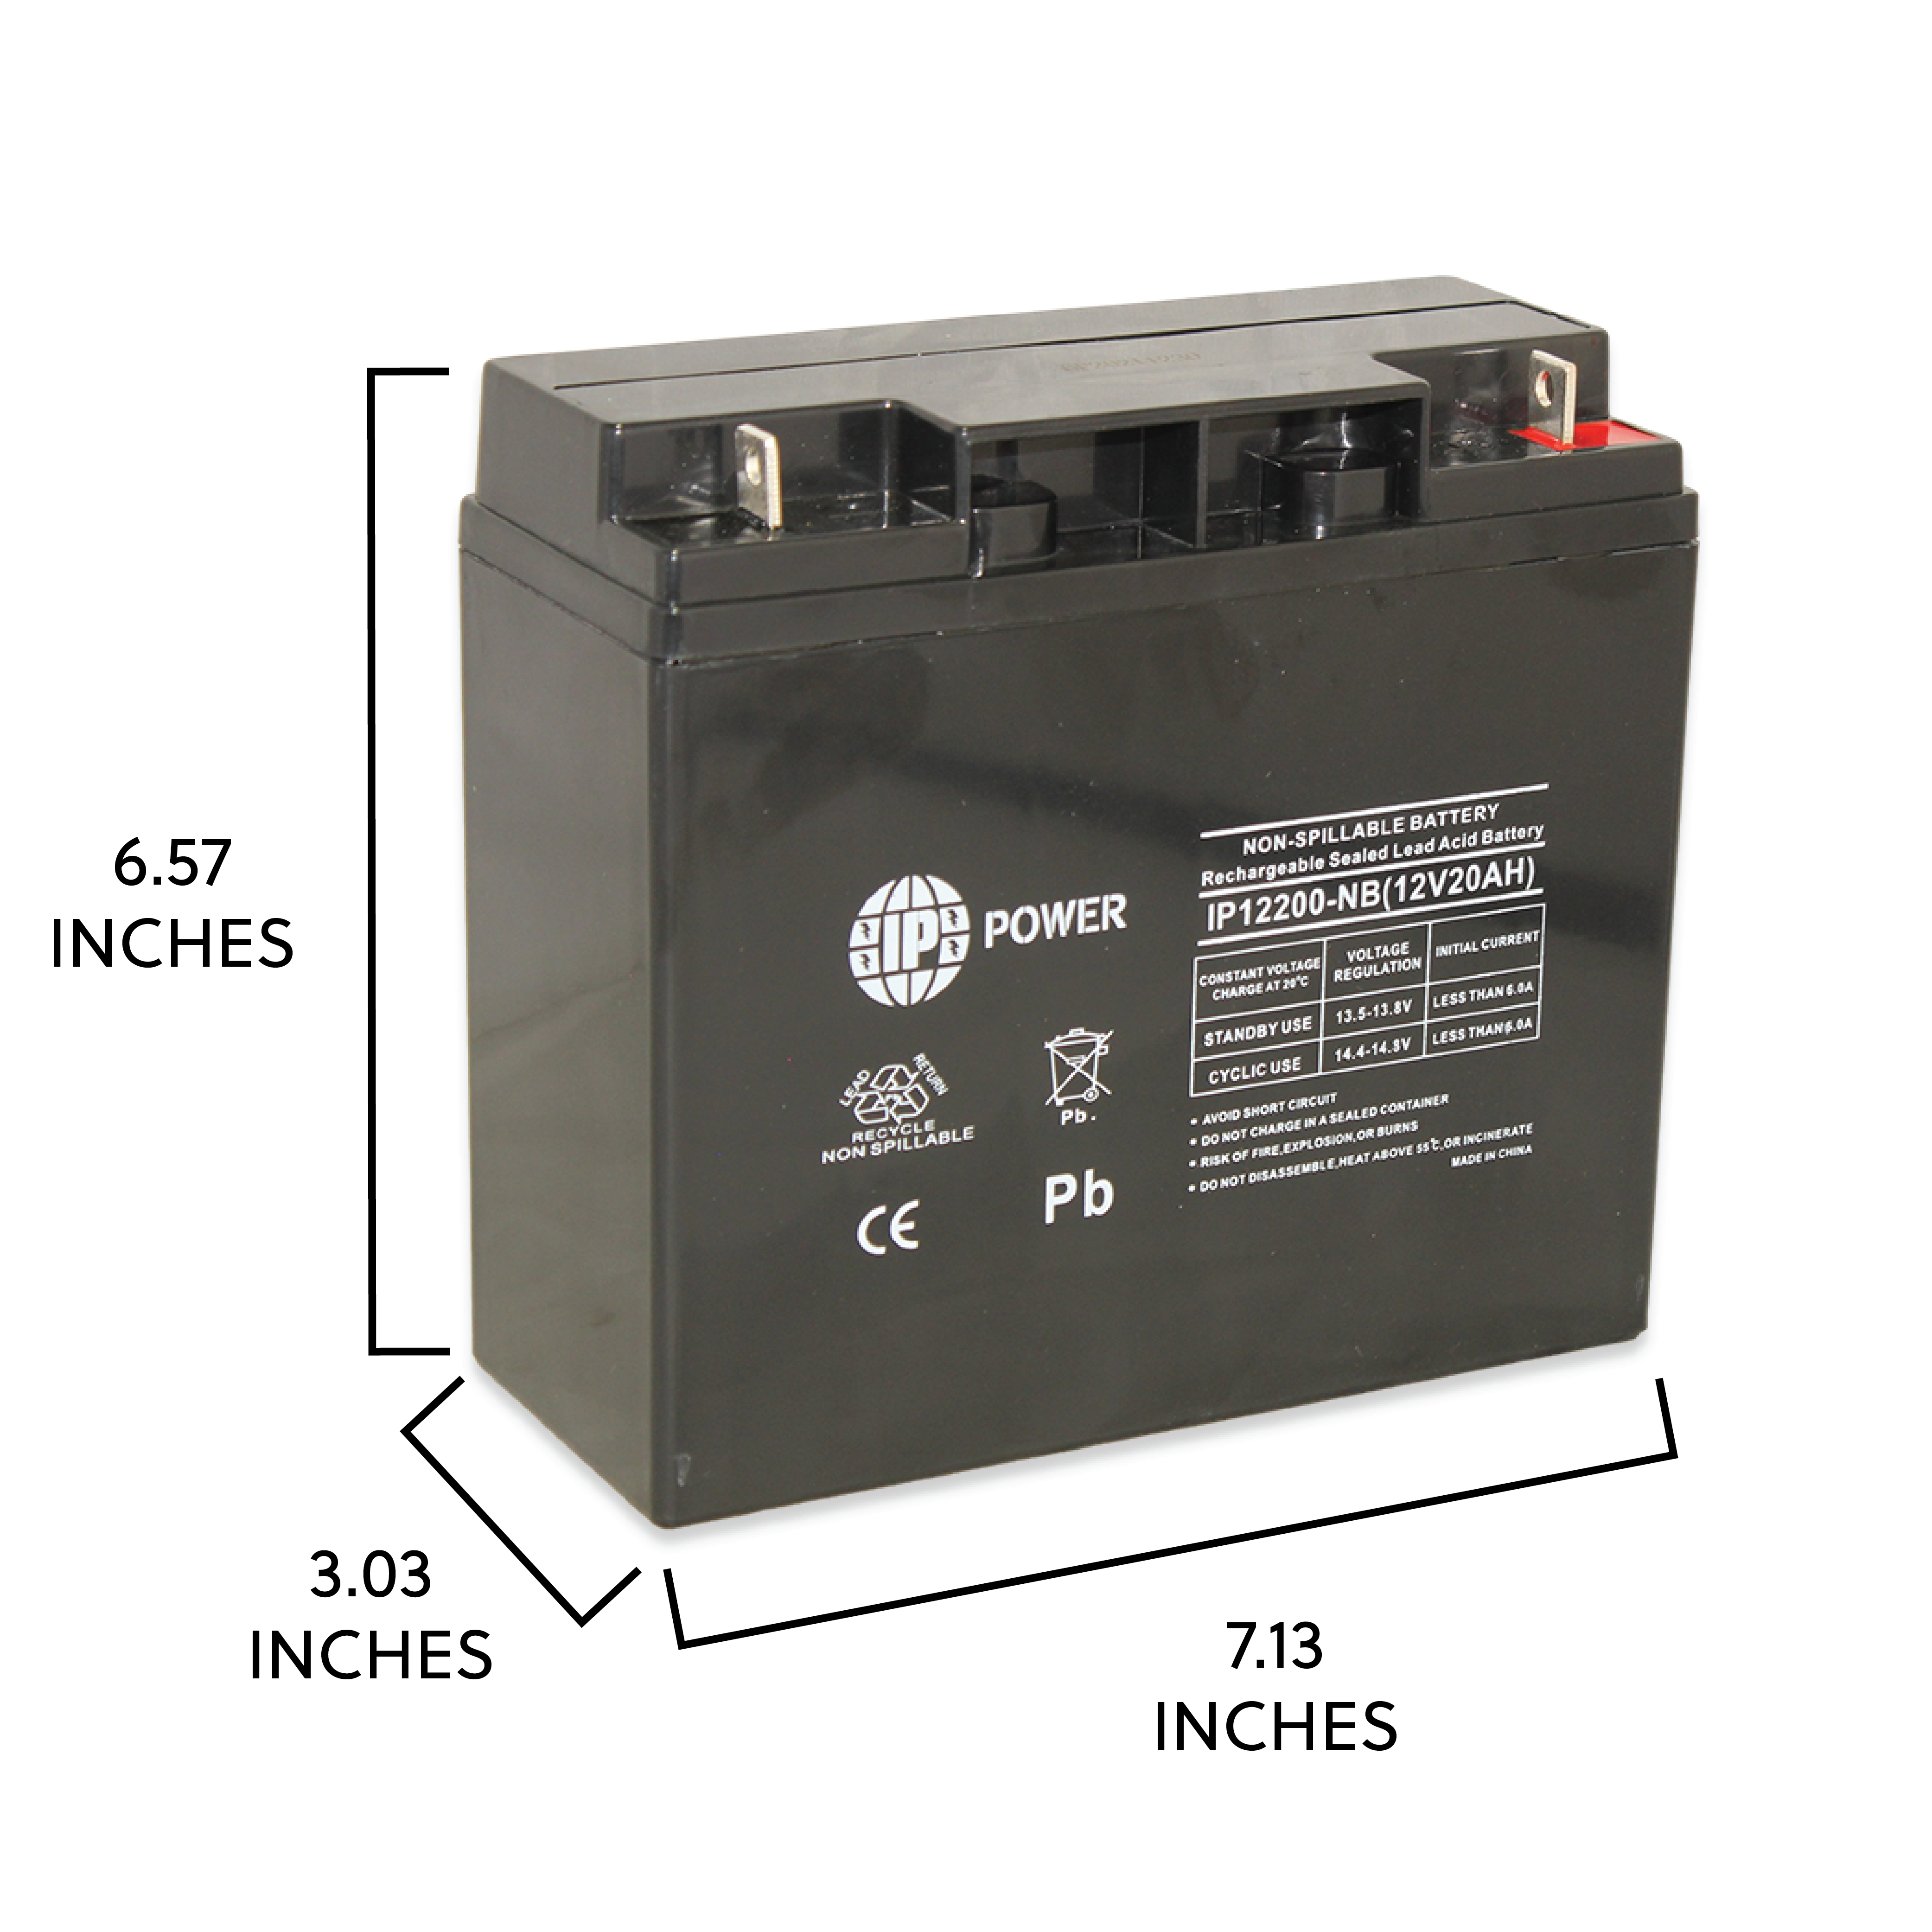 IP POWER IP12200-NB 12 Volt 18 Amp, Sealed Lead Acid Rechargeable Battery